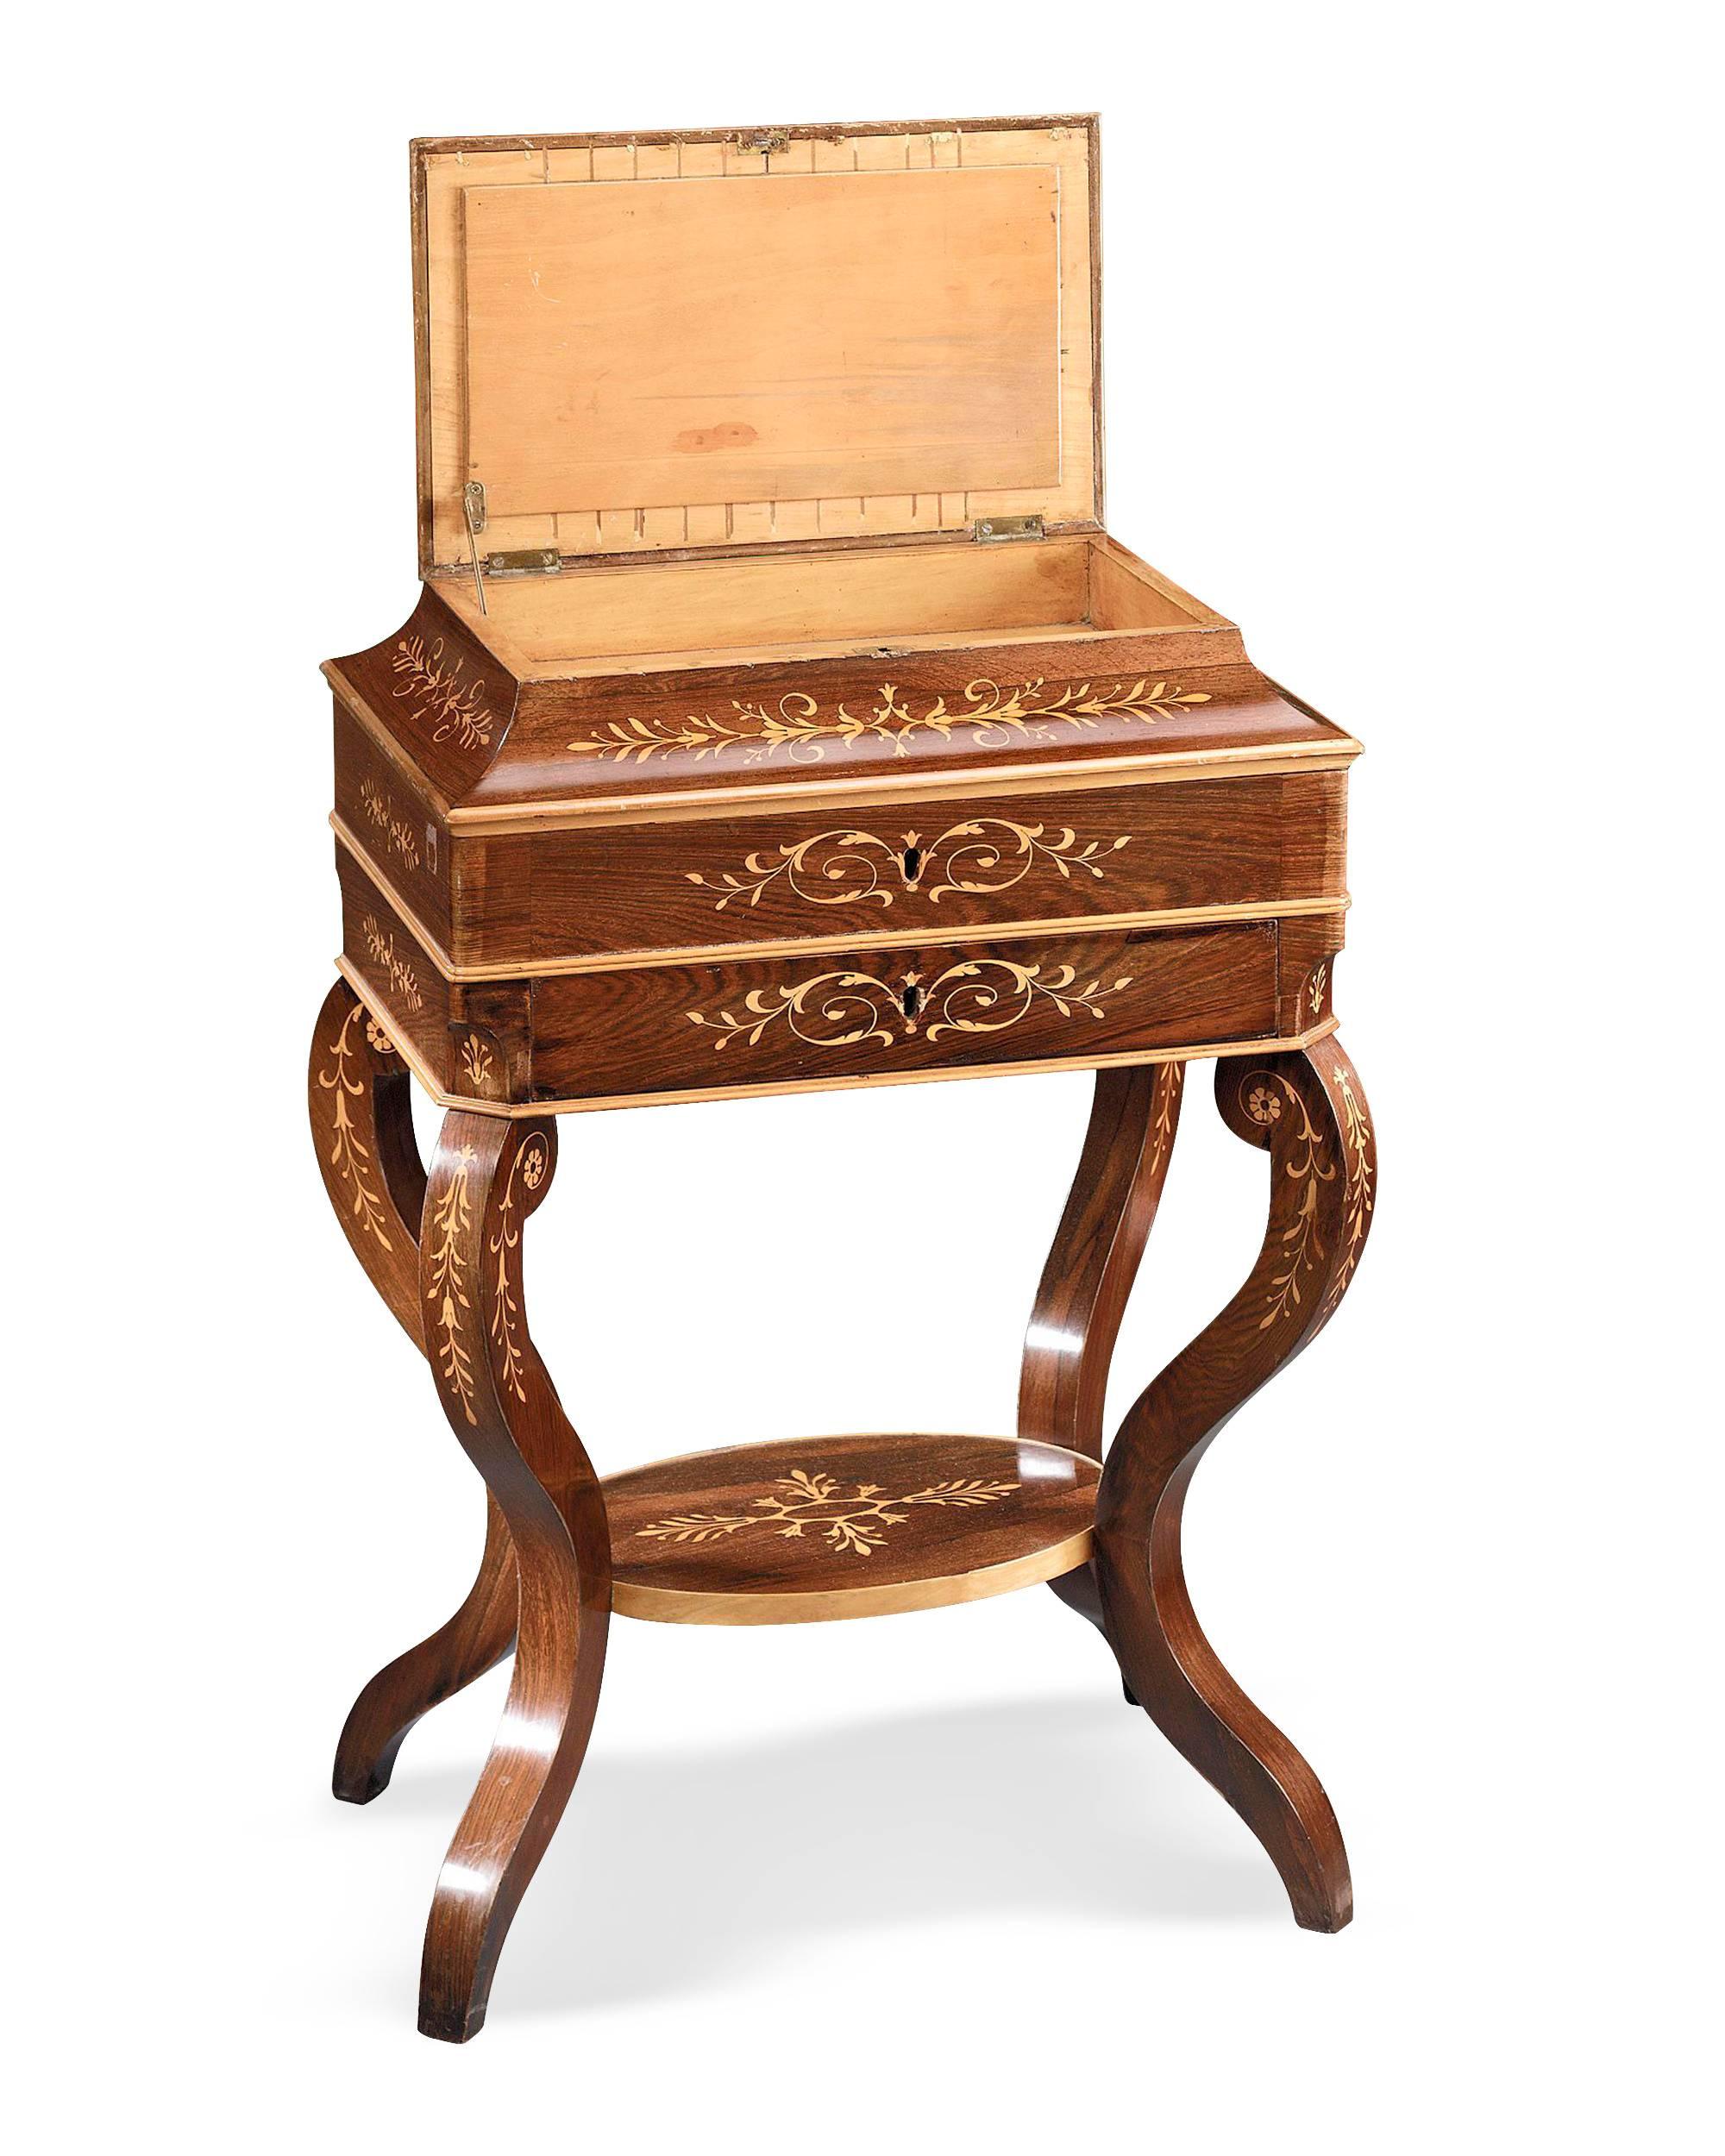 This fine Charles X rosewood sewing stand rests upon beautifully curved legs and is adorned with satinwood marquetry. The Stand is equipped with plenty of storage including a fitted tray with several compartments that lift out, a drawer and a